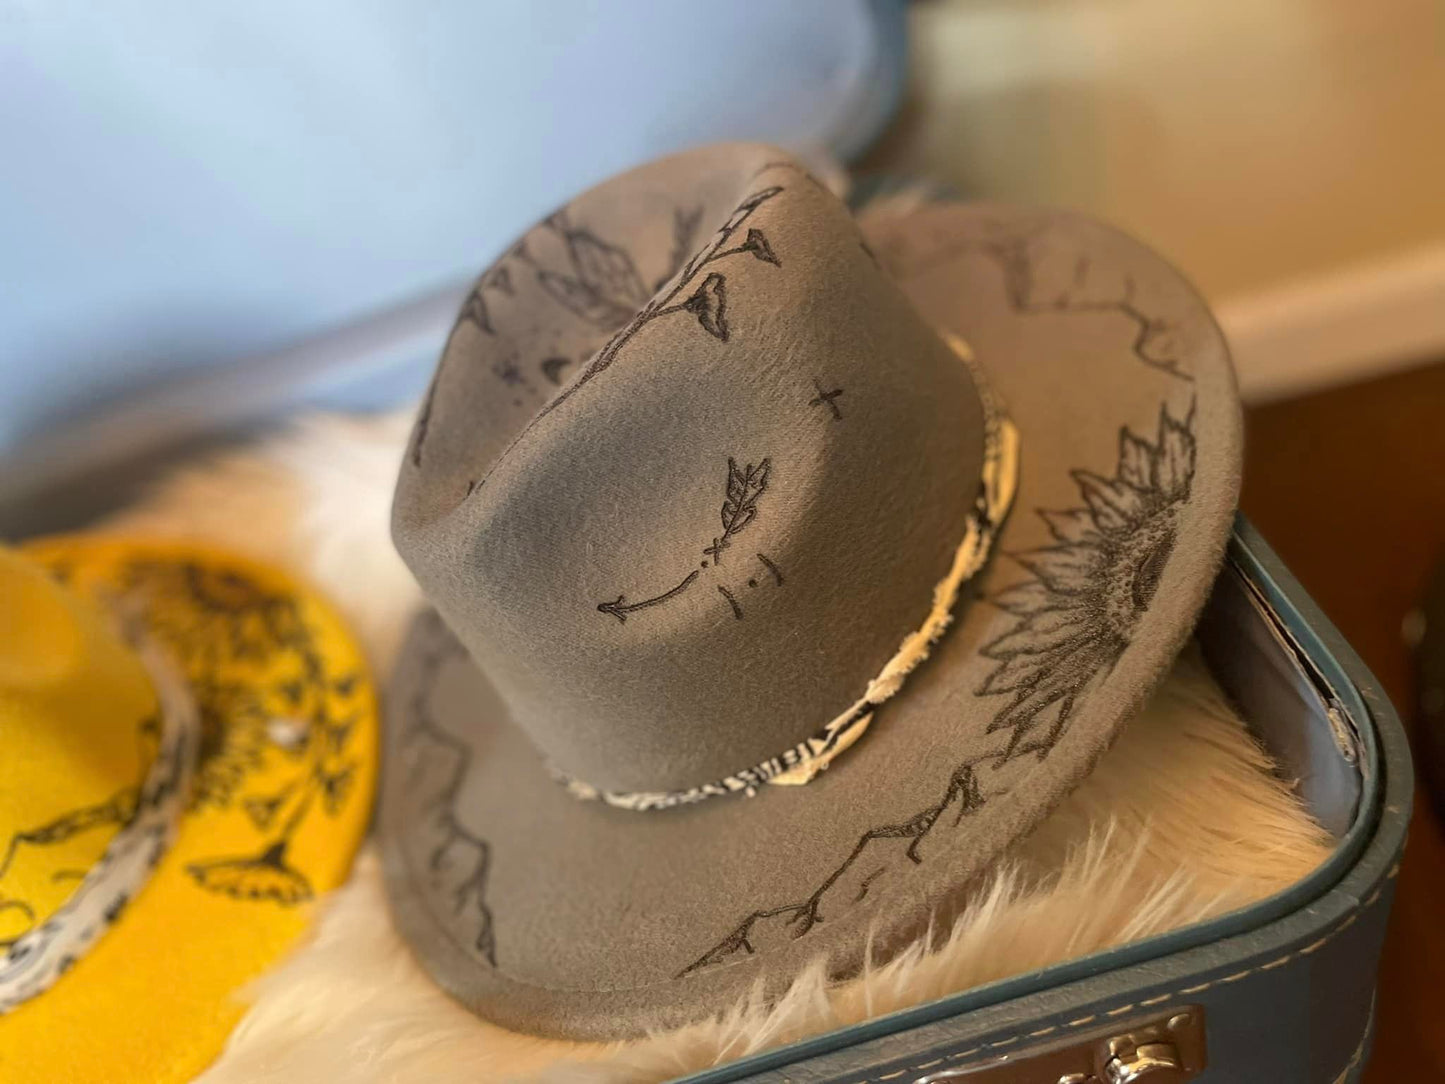 Western HANDMADE hats! Made to order!